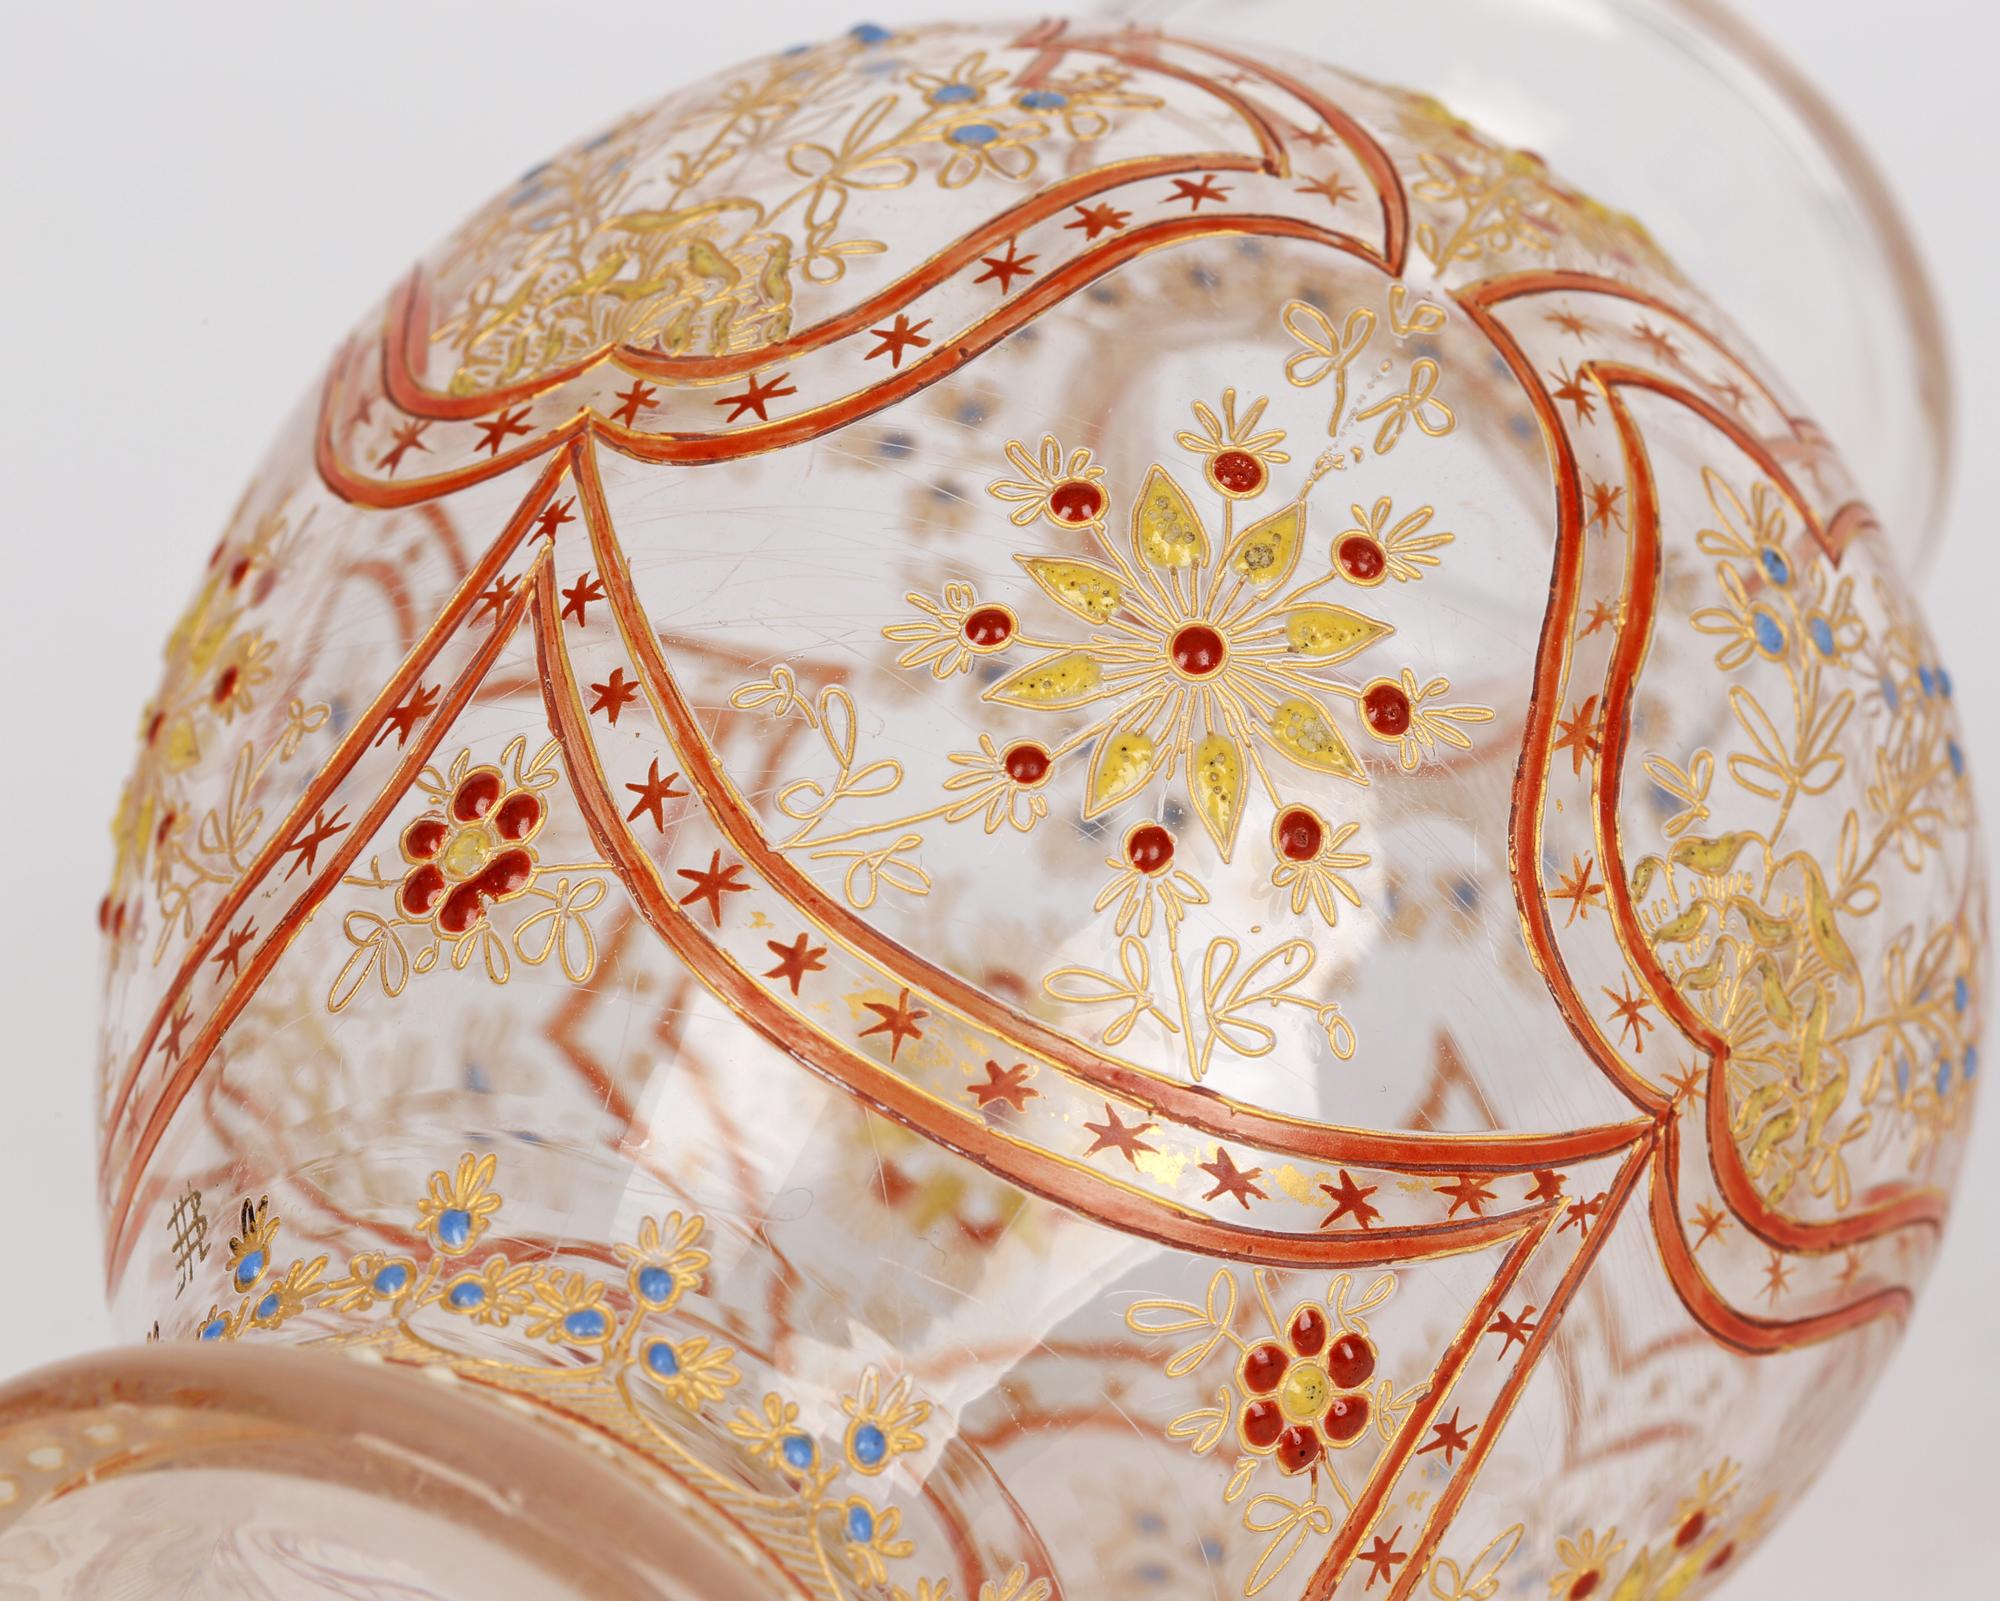 A fine Austrian Viennese clear crystal glass vase delicately decorated with Persian style floral designs in jeweled enameling by J & L Lobmeyr and dating from around 1880. The small vase is of baluster shape with a bowl shaped top on a narrow neck